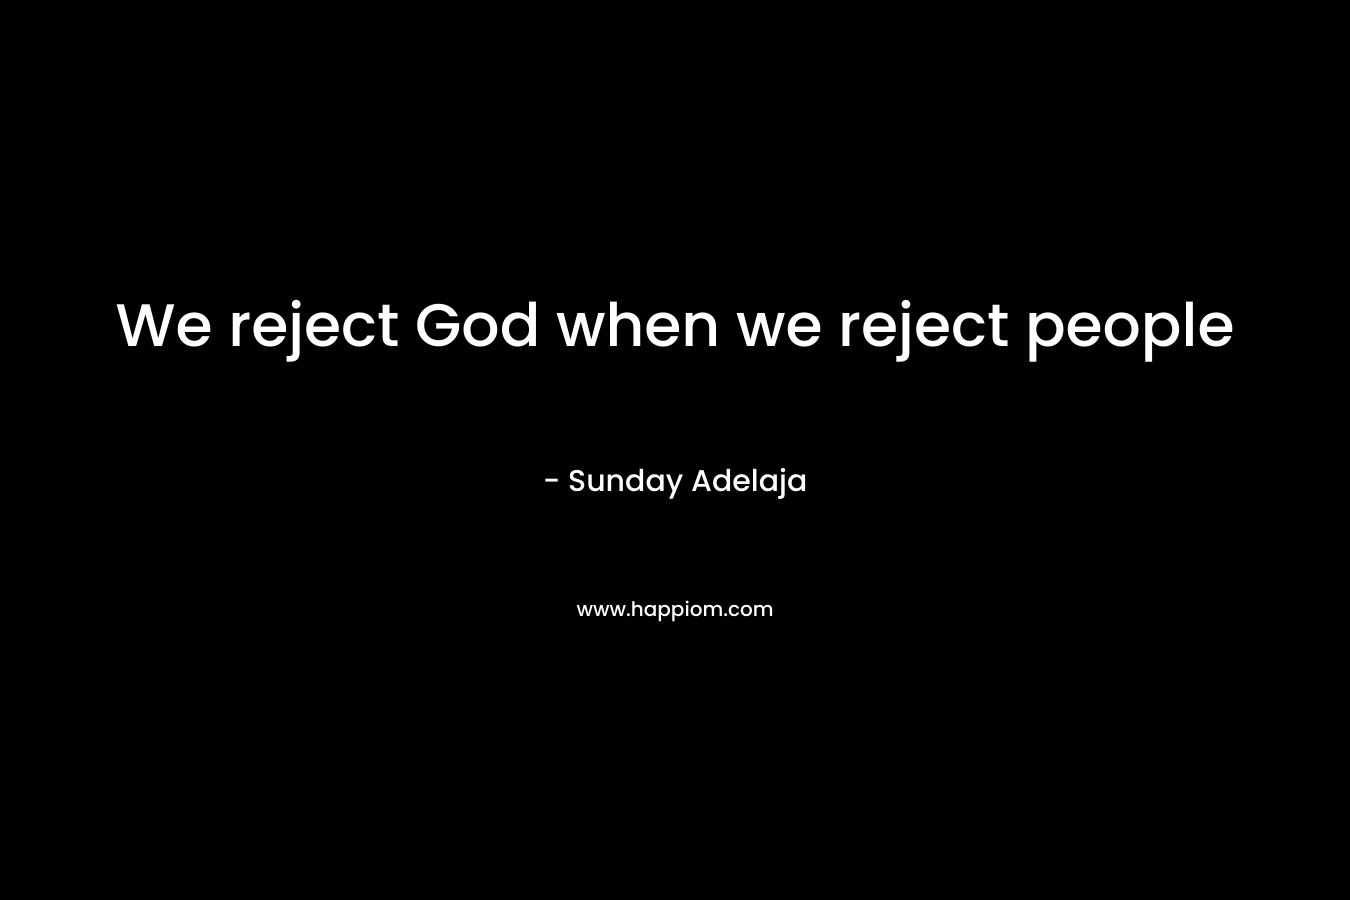 We reject God when we reject people